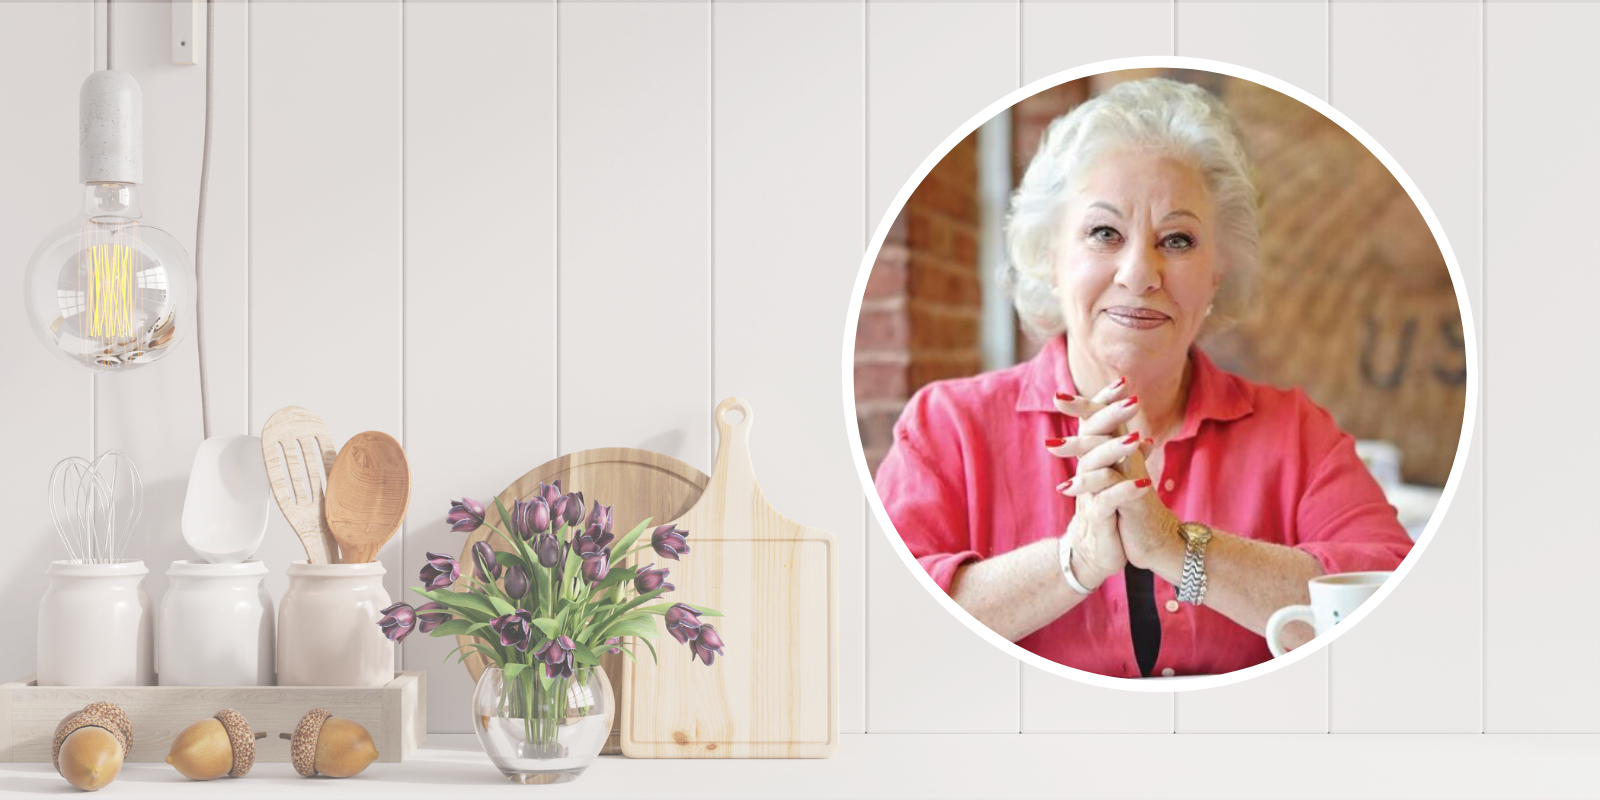 A round photograph of chef Ina Pinkney, a senior white woman with white hair wearing a pink shirt, sits on top of a photograph of a kitchen counter with various cooking utensils and flowers.